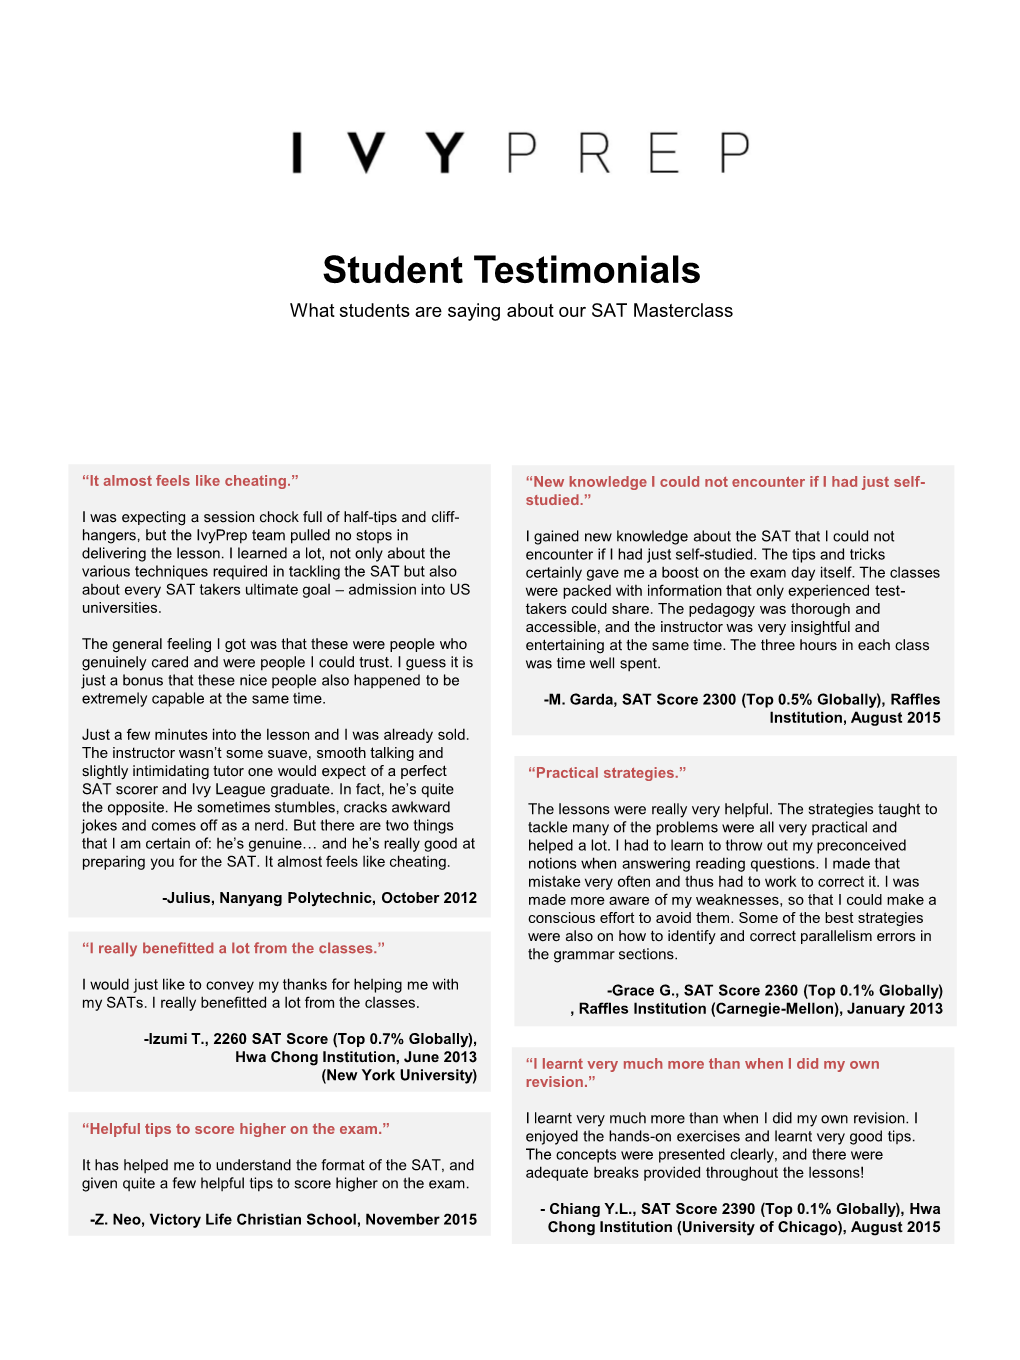 Student Testimonials What Students Are Saying About Our SAT Masterclass